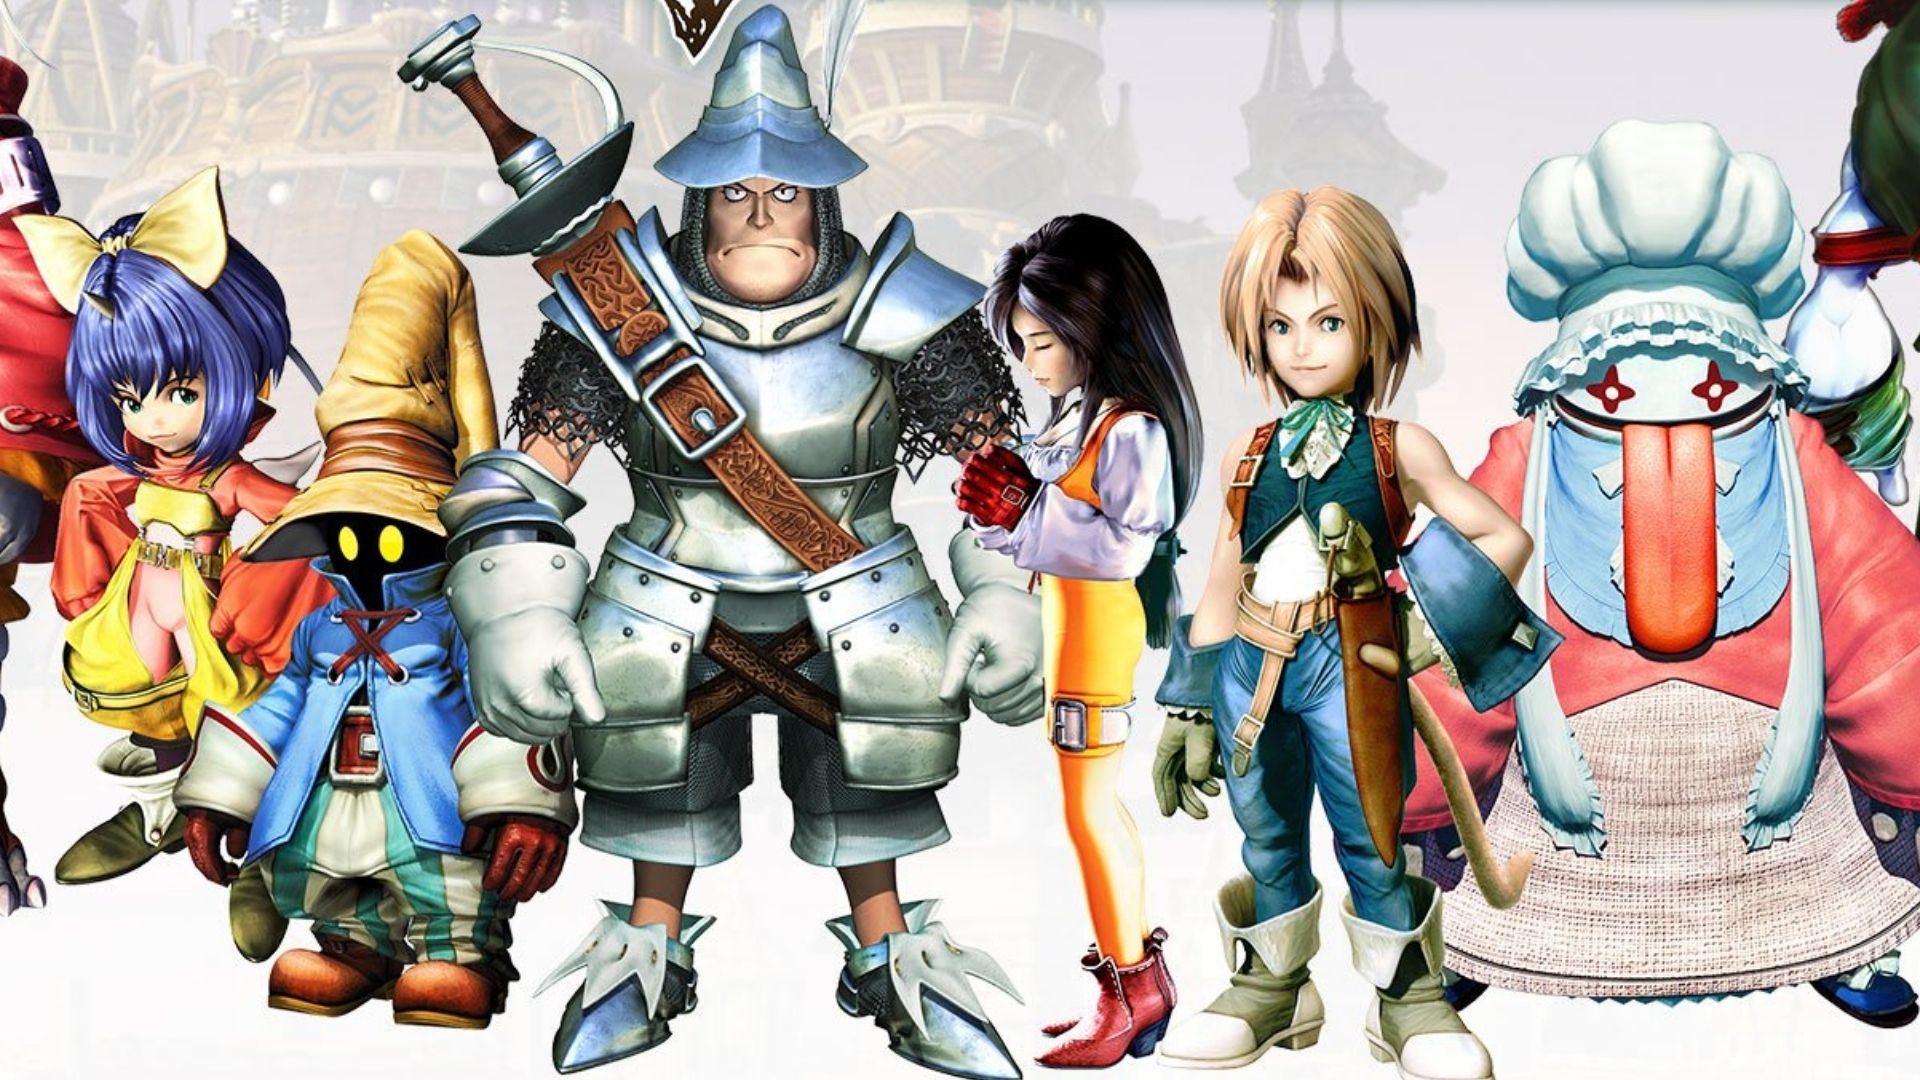 We Ll Get Our First Look At The Final Fantasy Ix Animated Series Soon Pocket Tactics